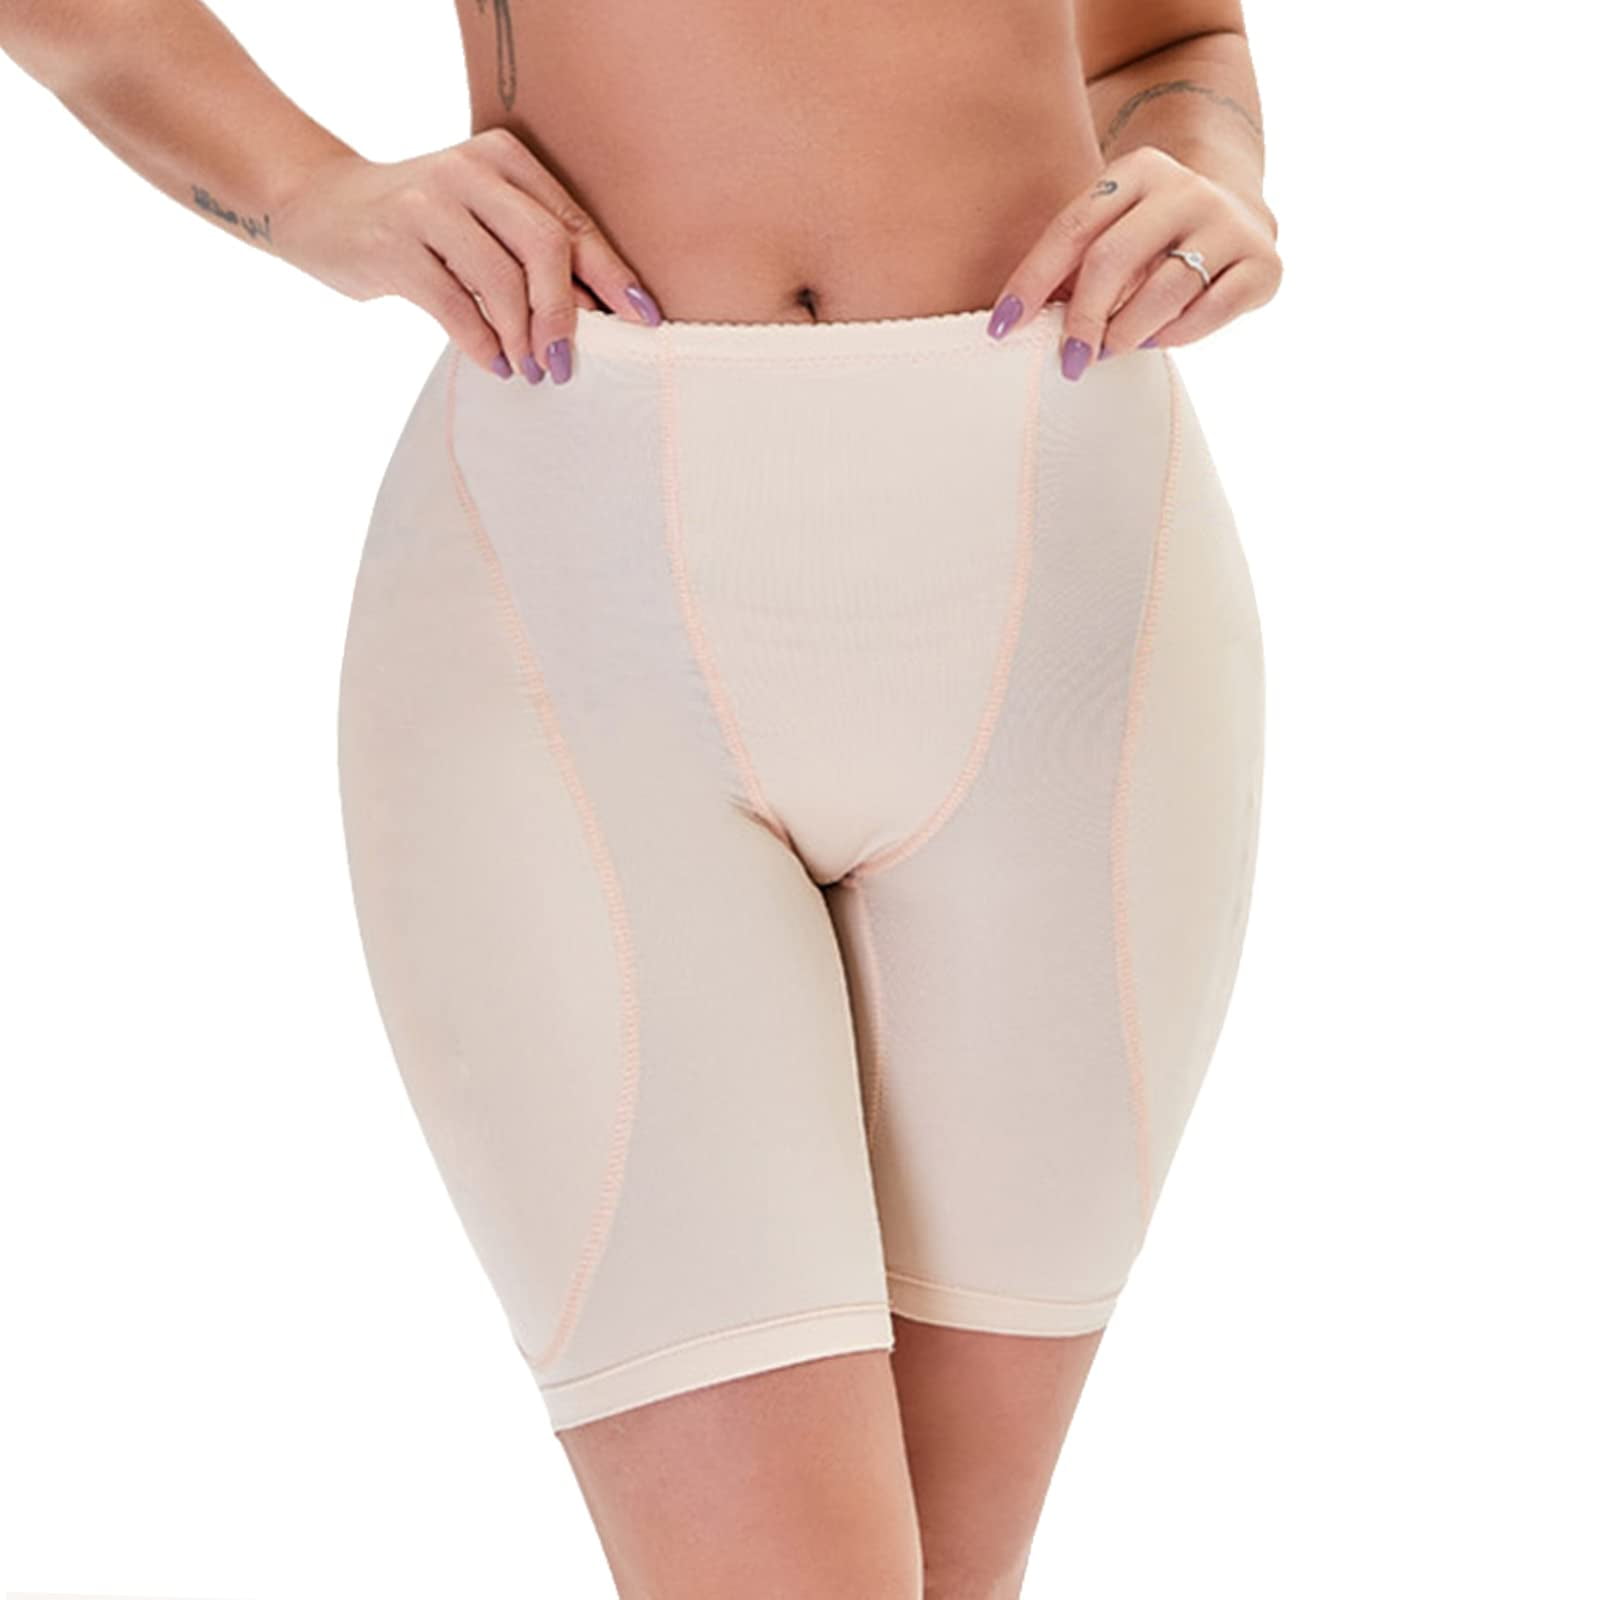 Exquisite Silicone Buttock and Hip Pads 